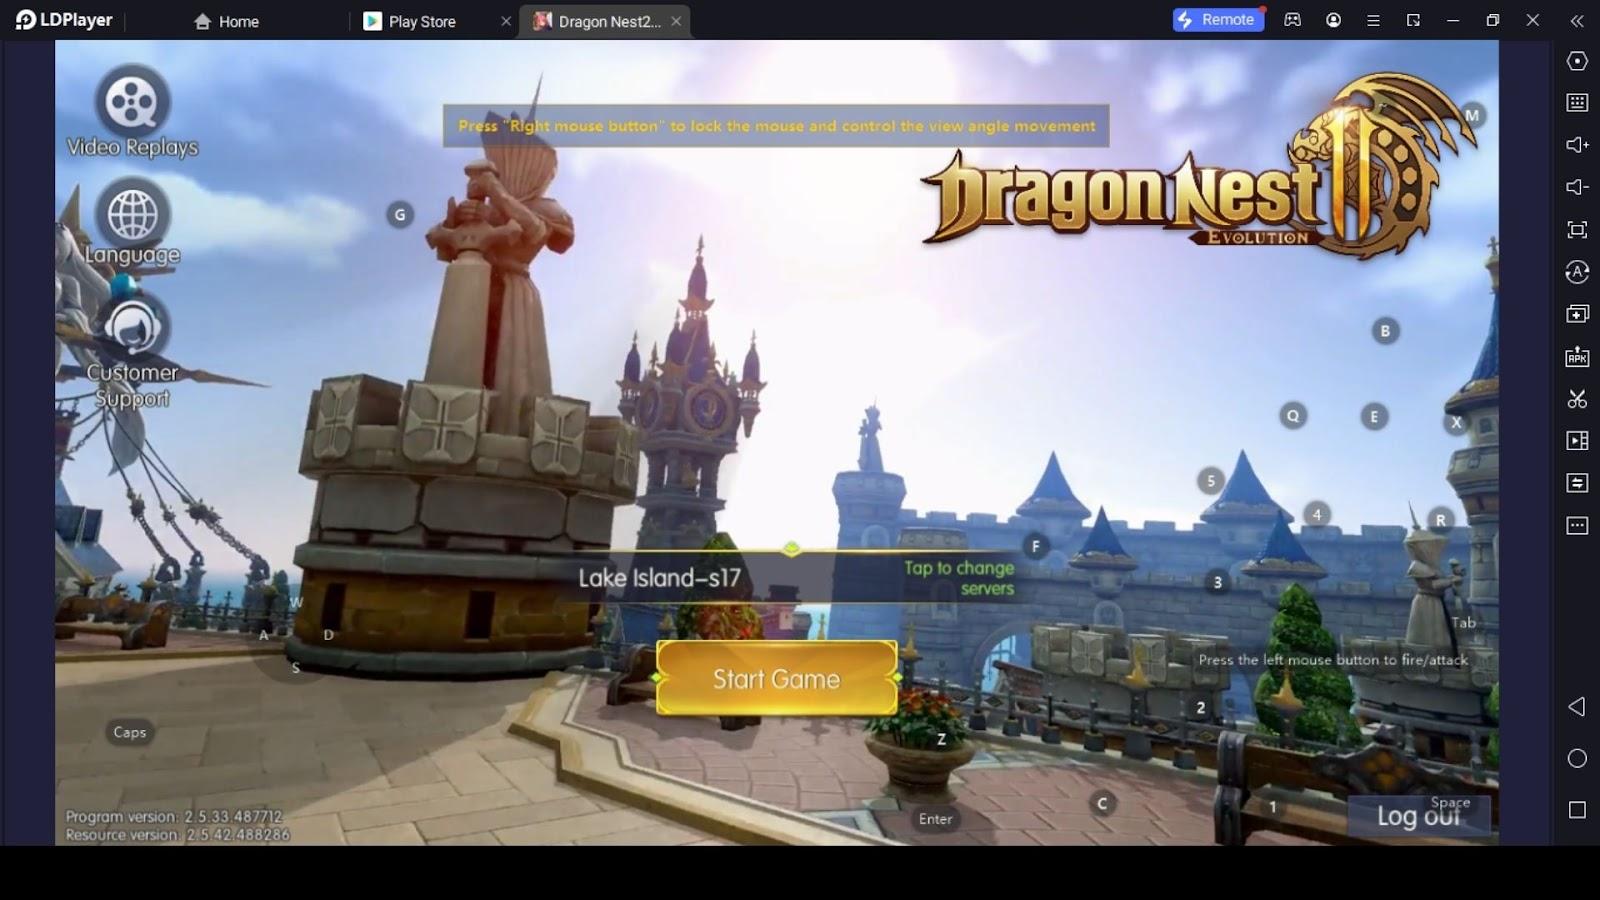 How to Earn More Stamina in Dragon Nest 2: Evolution